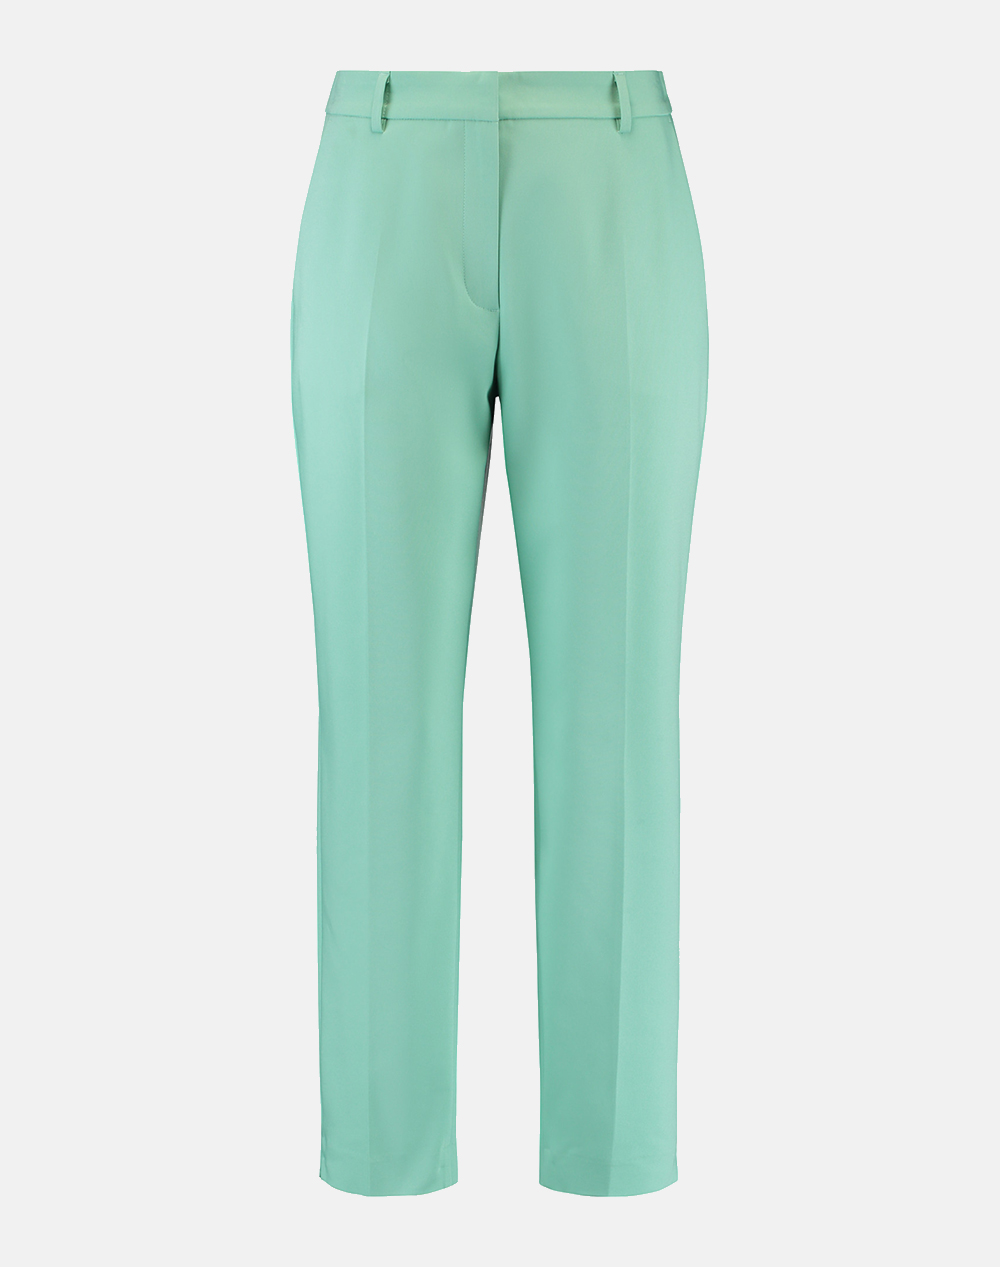 GERRY WEBER PANT LEISURE CROPPED 320006-31335-50375 MintGreen 3810AGERR2000146_XR30280